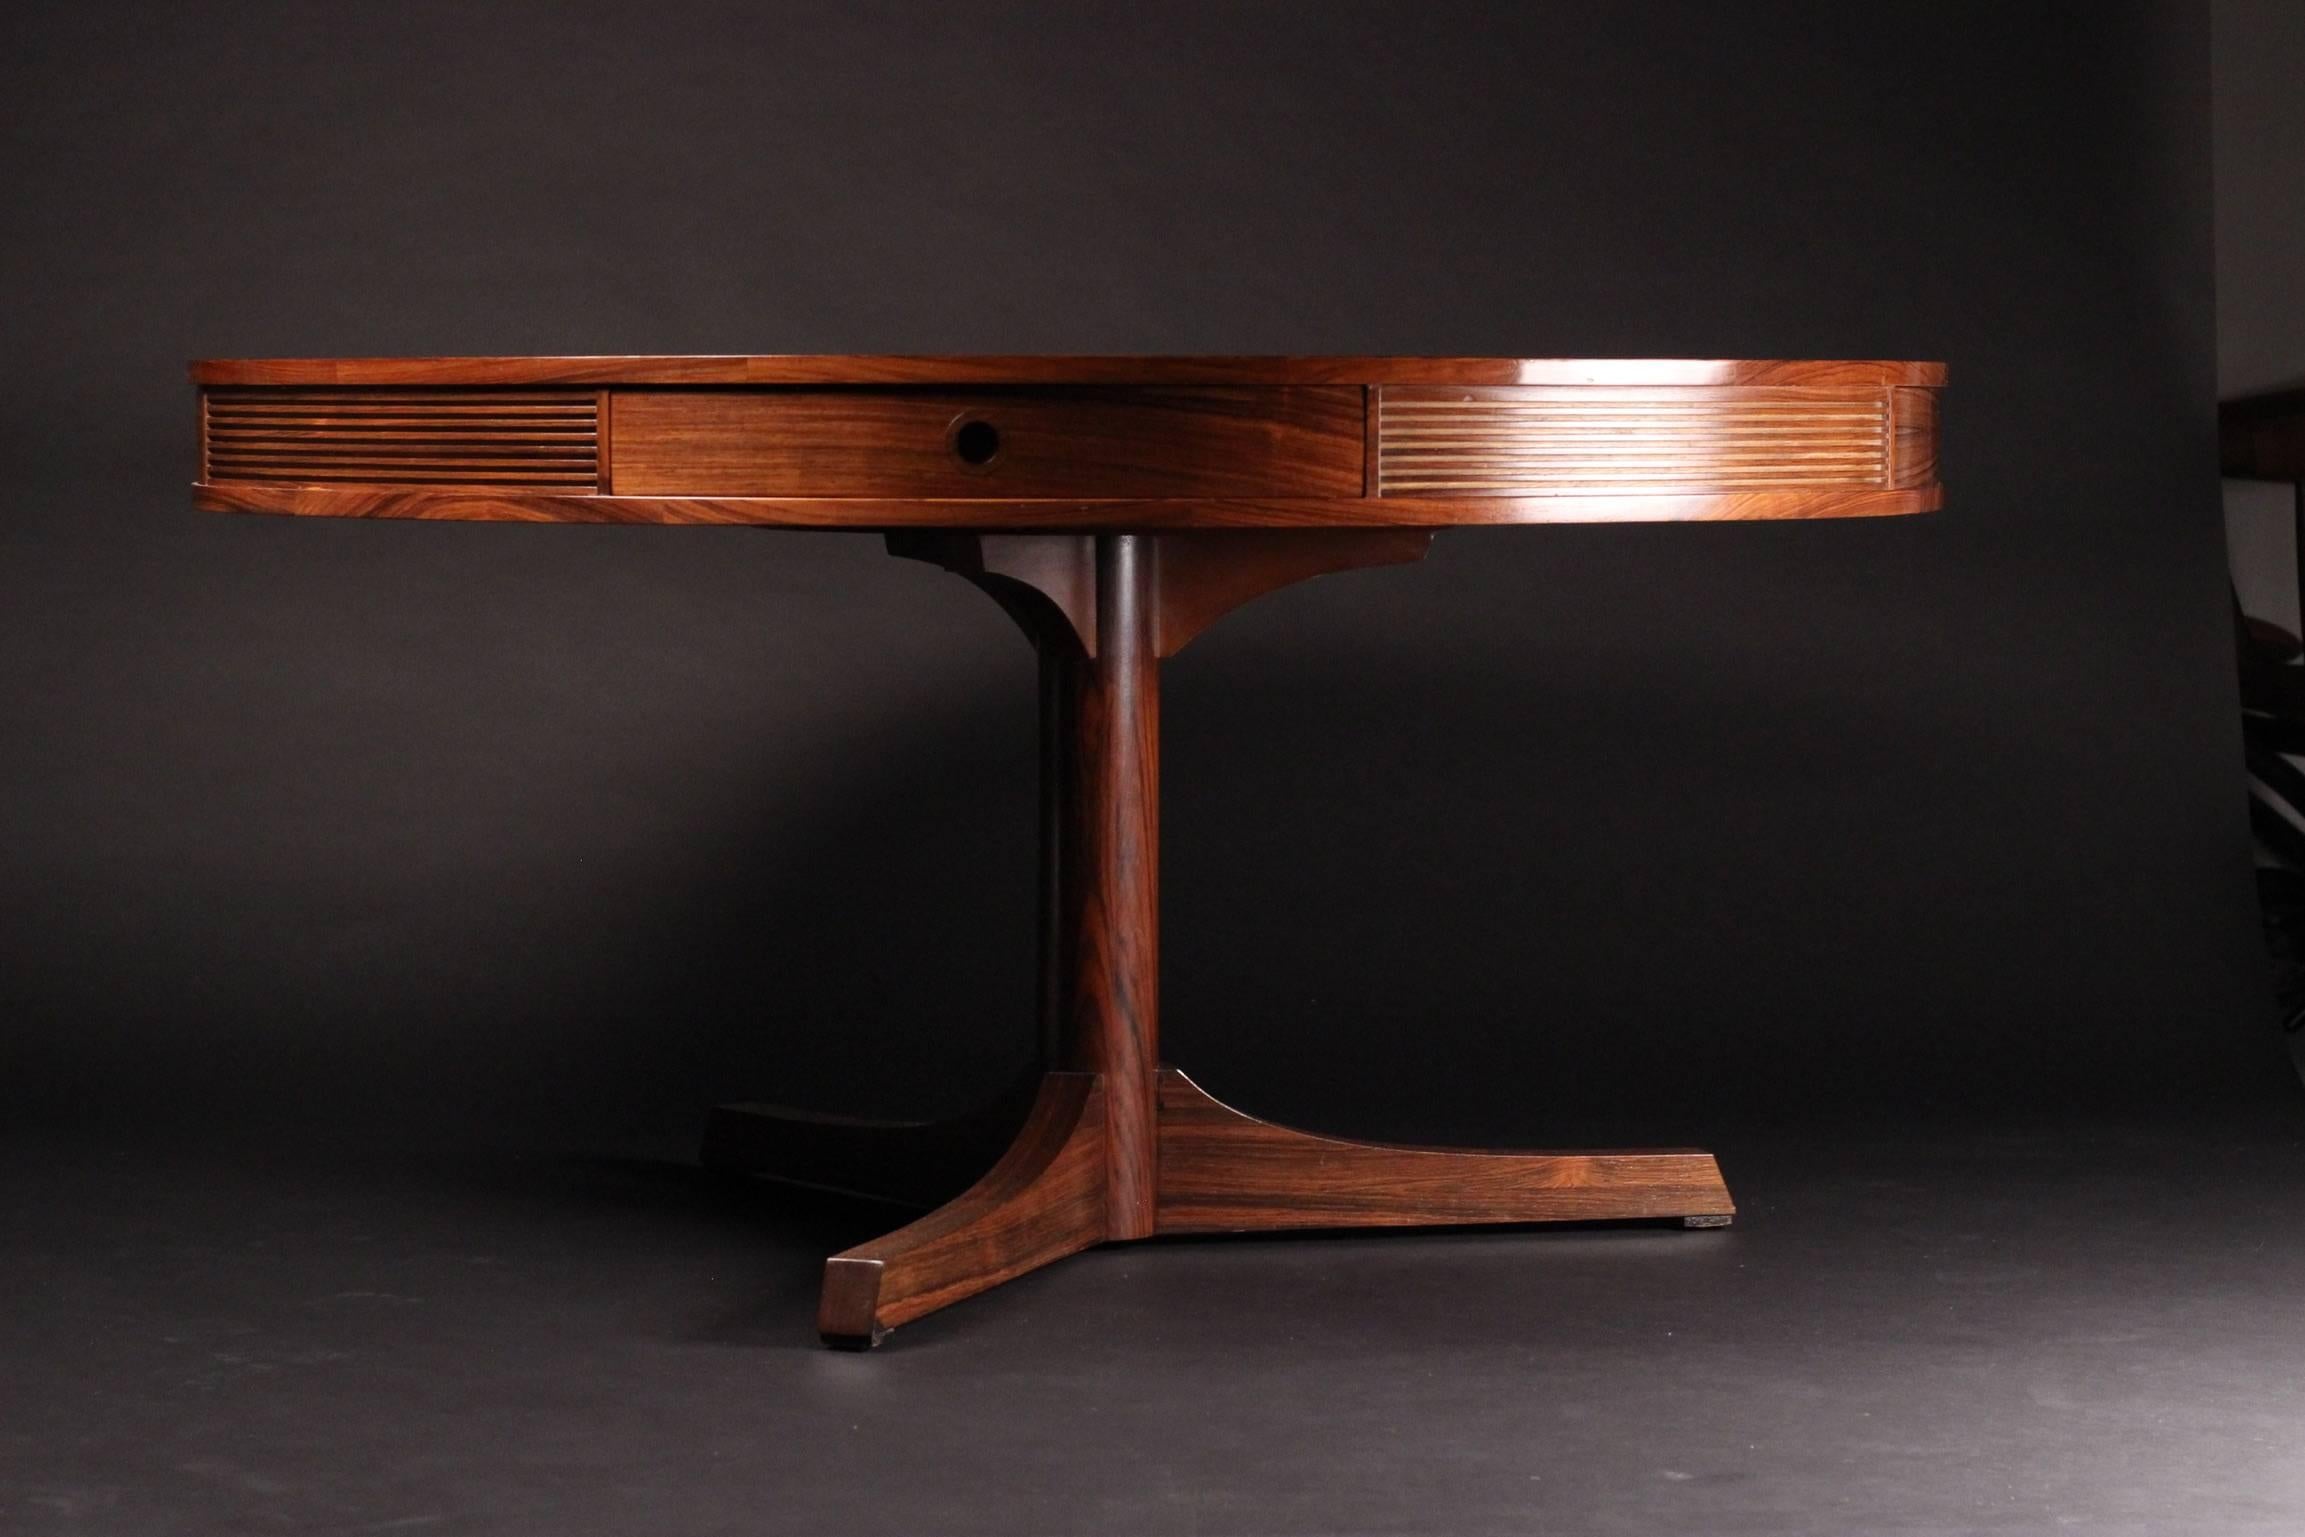 Designed by the highly respected Robert Heritage and made by the wonderful sounding Archie Shine Ltd. This piece was retailed at the World famous furniture store Heals of London, circa 1965.
A large beautiful and highly distinctive grained Rosewood